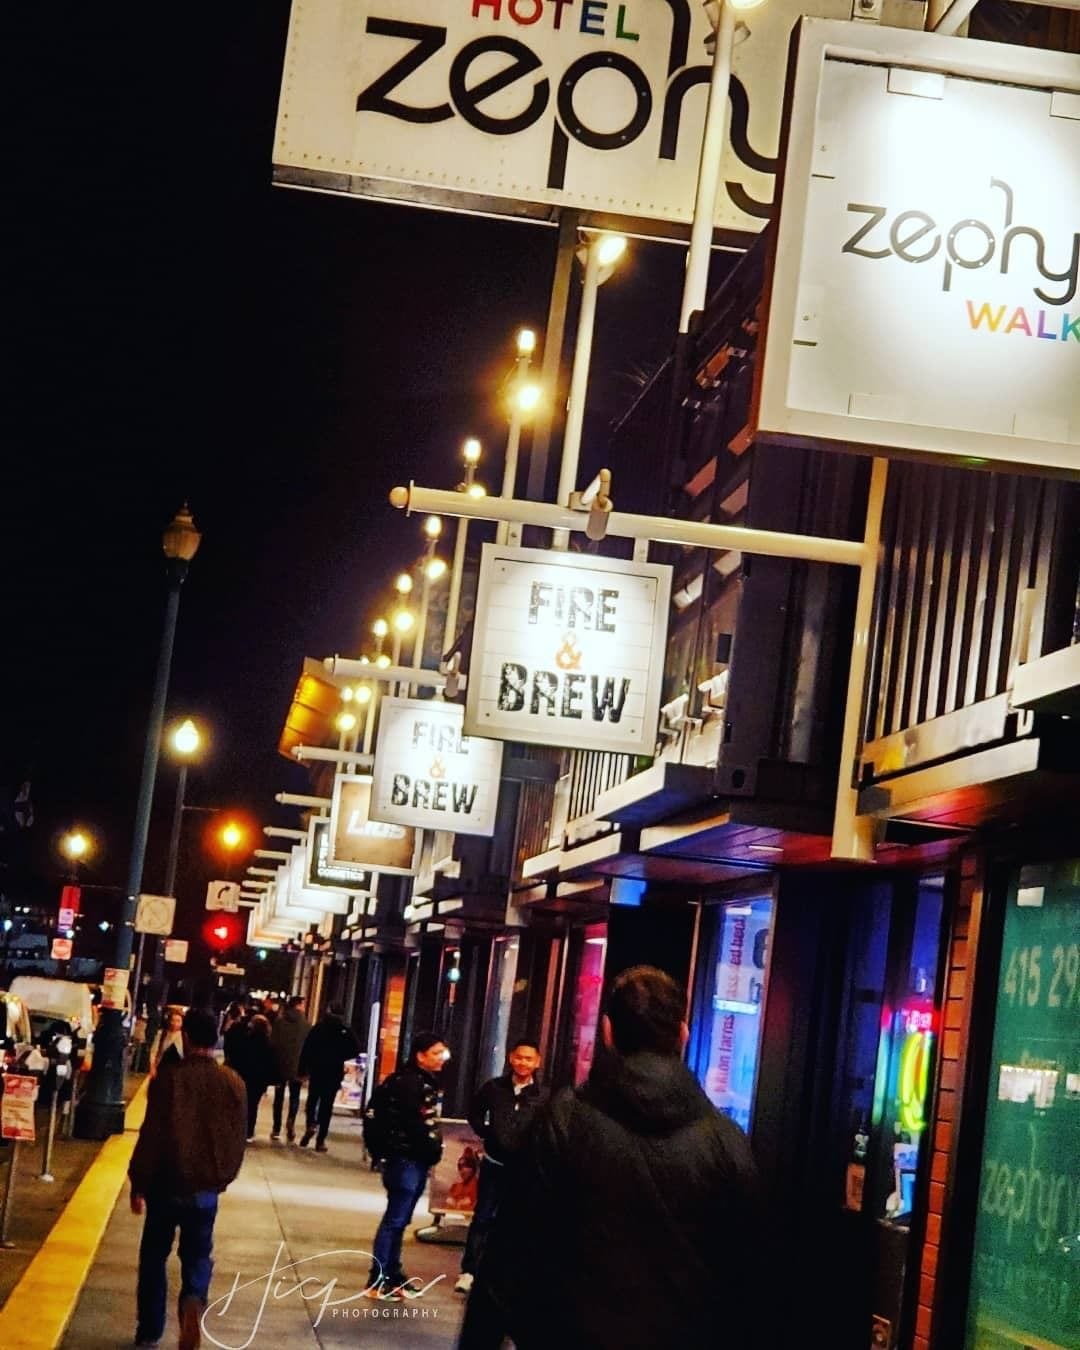 This Holiday, discover our very own Zephyr Walk. You will find a plethora of things to do, from souvenir shopping and casual dining to interactive art exploration and bus tour reservations. #hotelzephyrsf #zephyrwalk #visitsf #fishermanswharf #repost 📷: @hixpix_photography: ©hixpixphotography2019